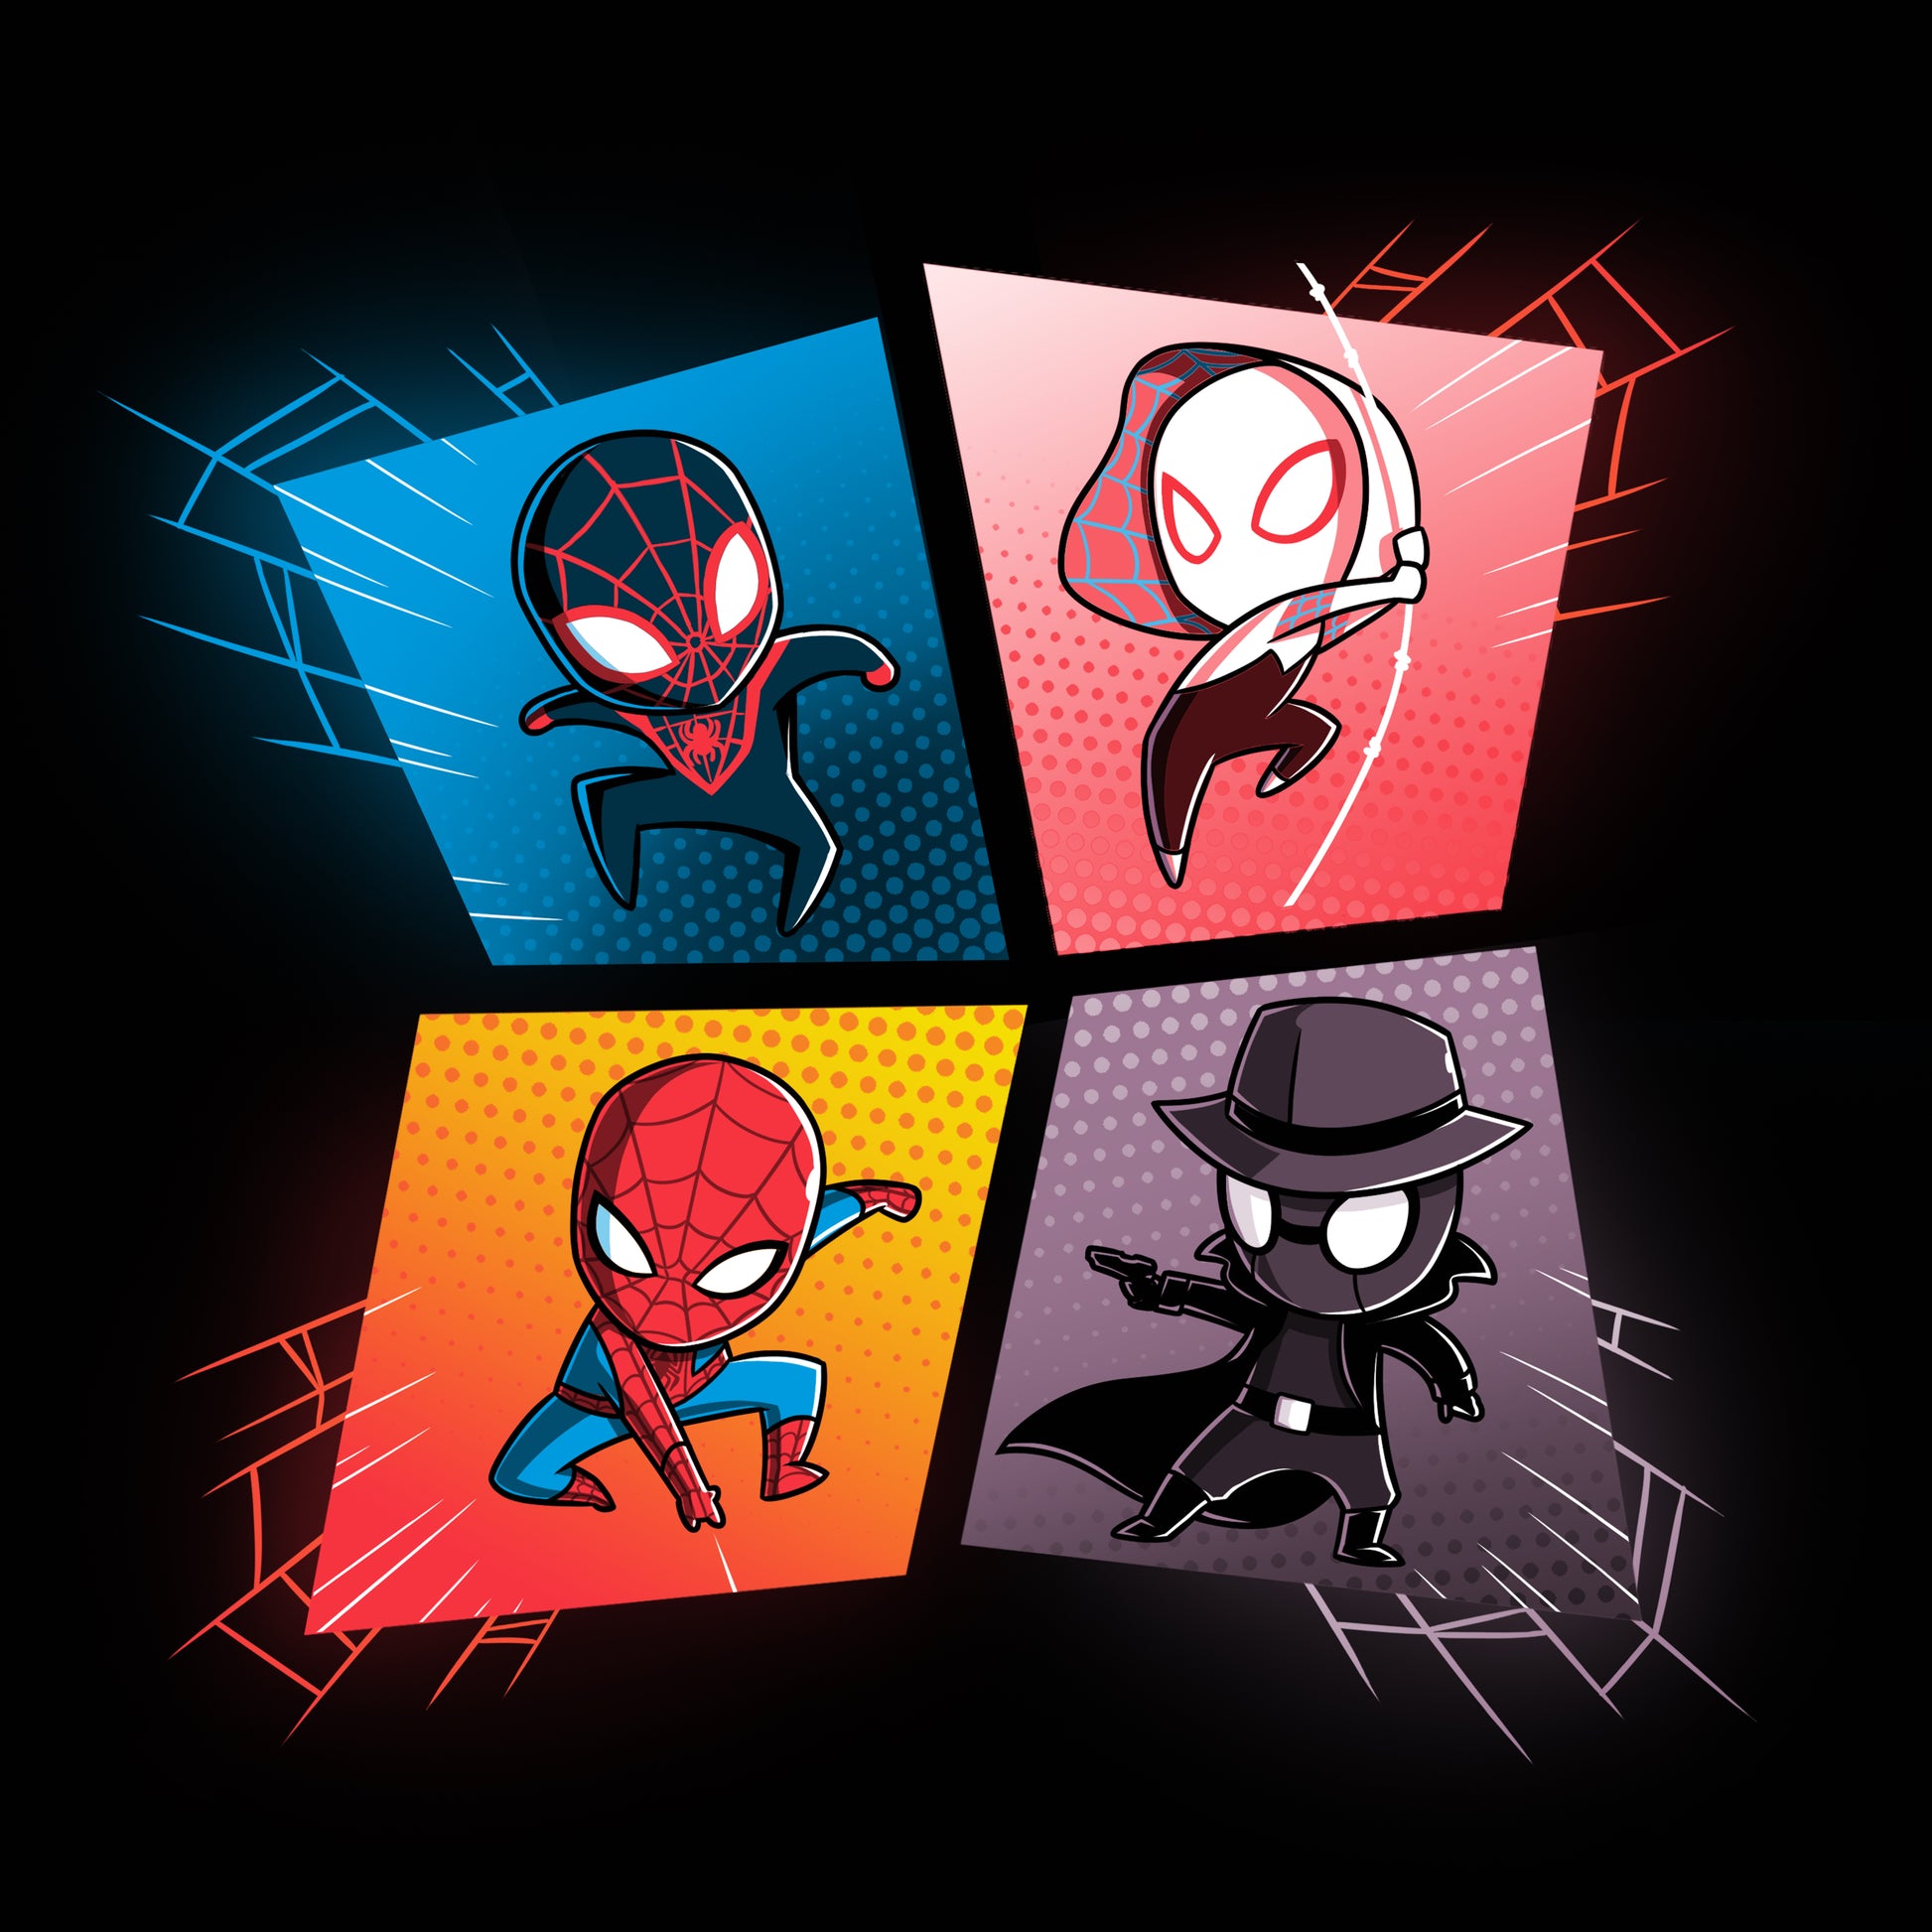 Officially licensed Marvel Spider-Man merchandise, The Spider-Verse by Marvel.